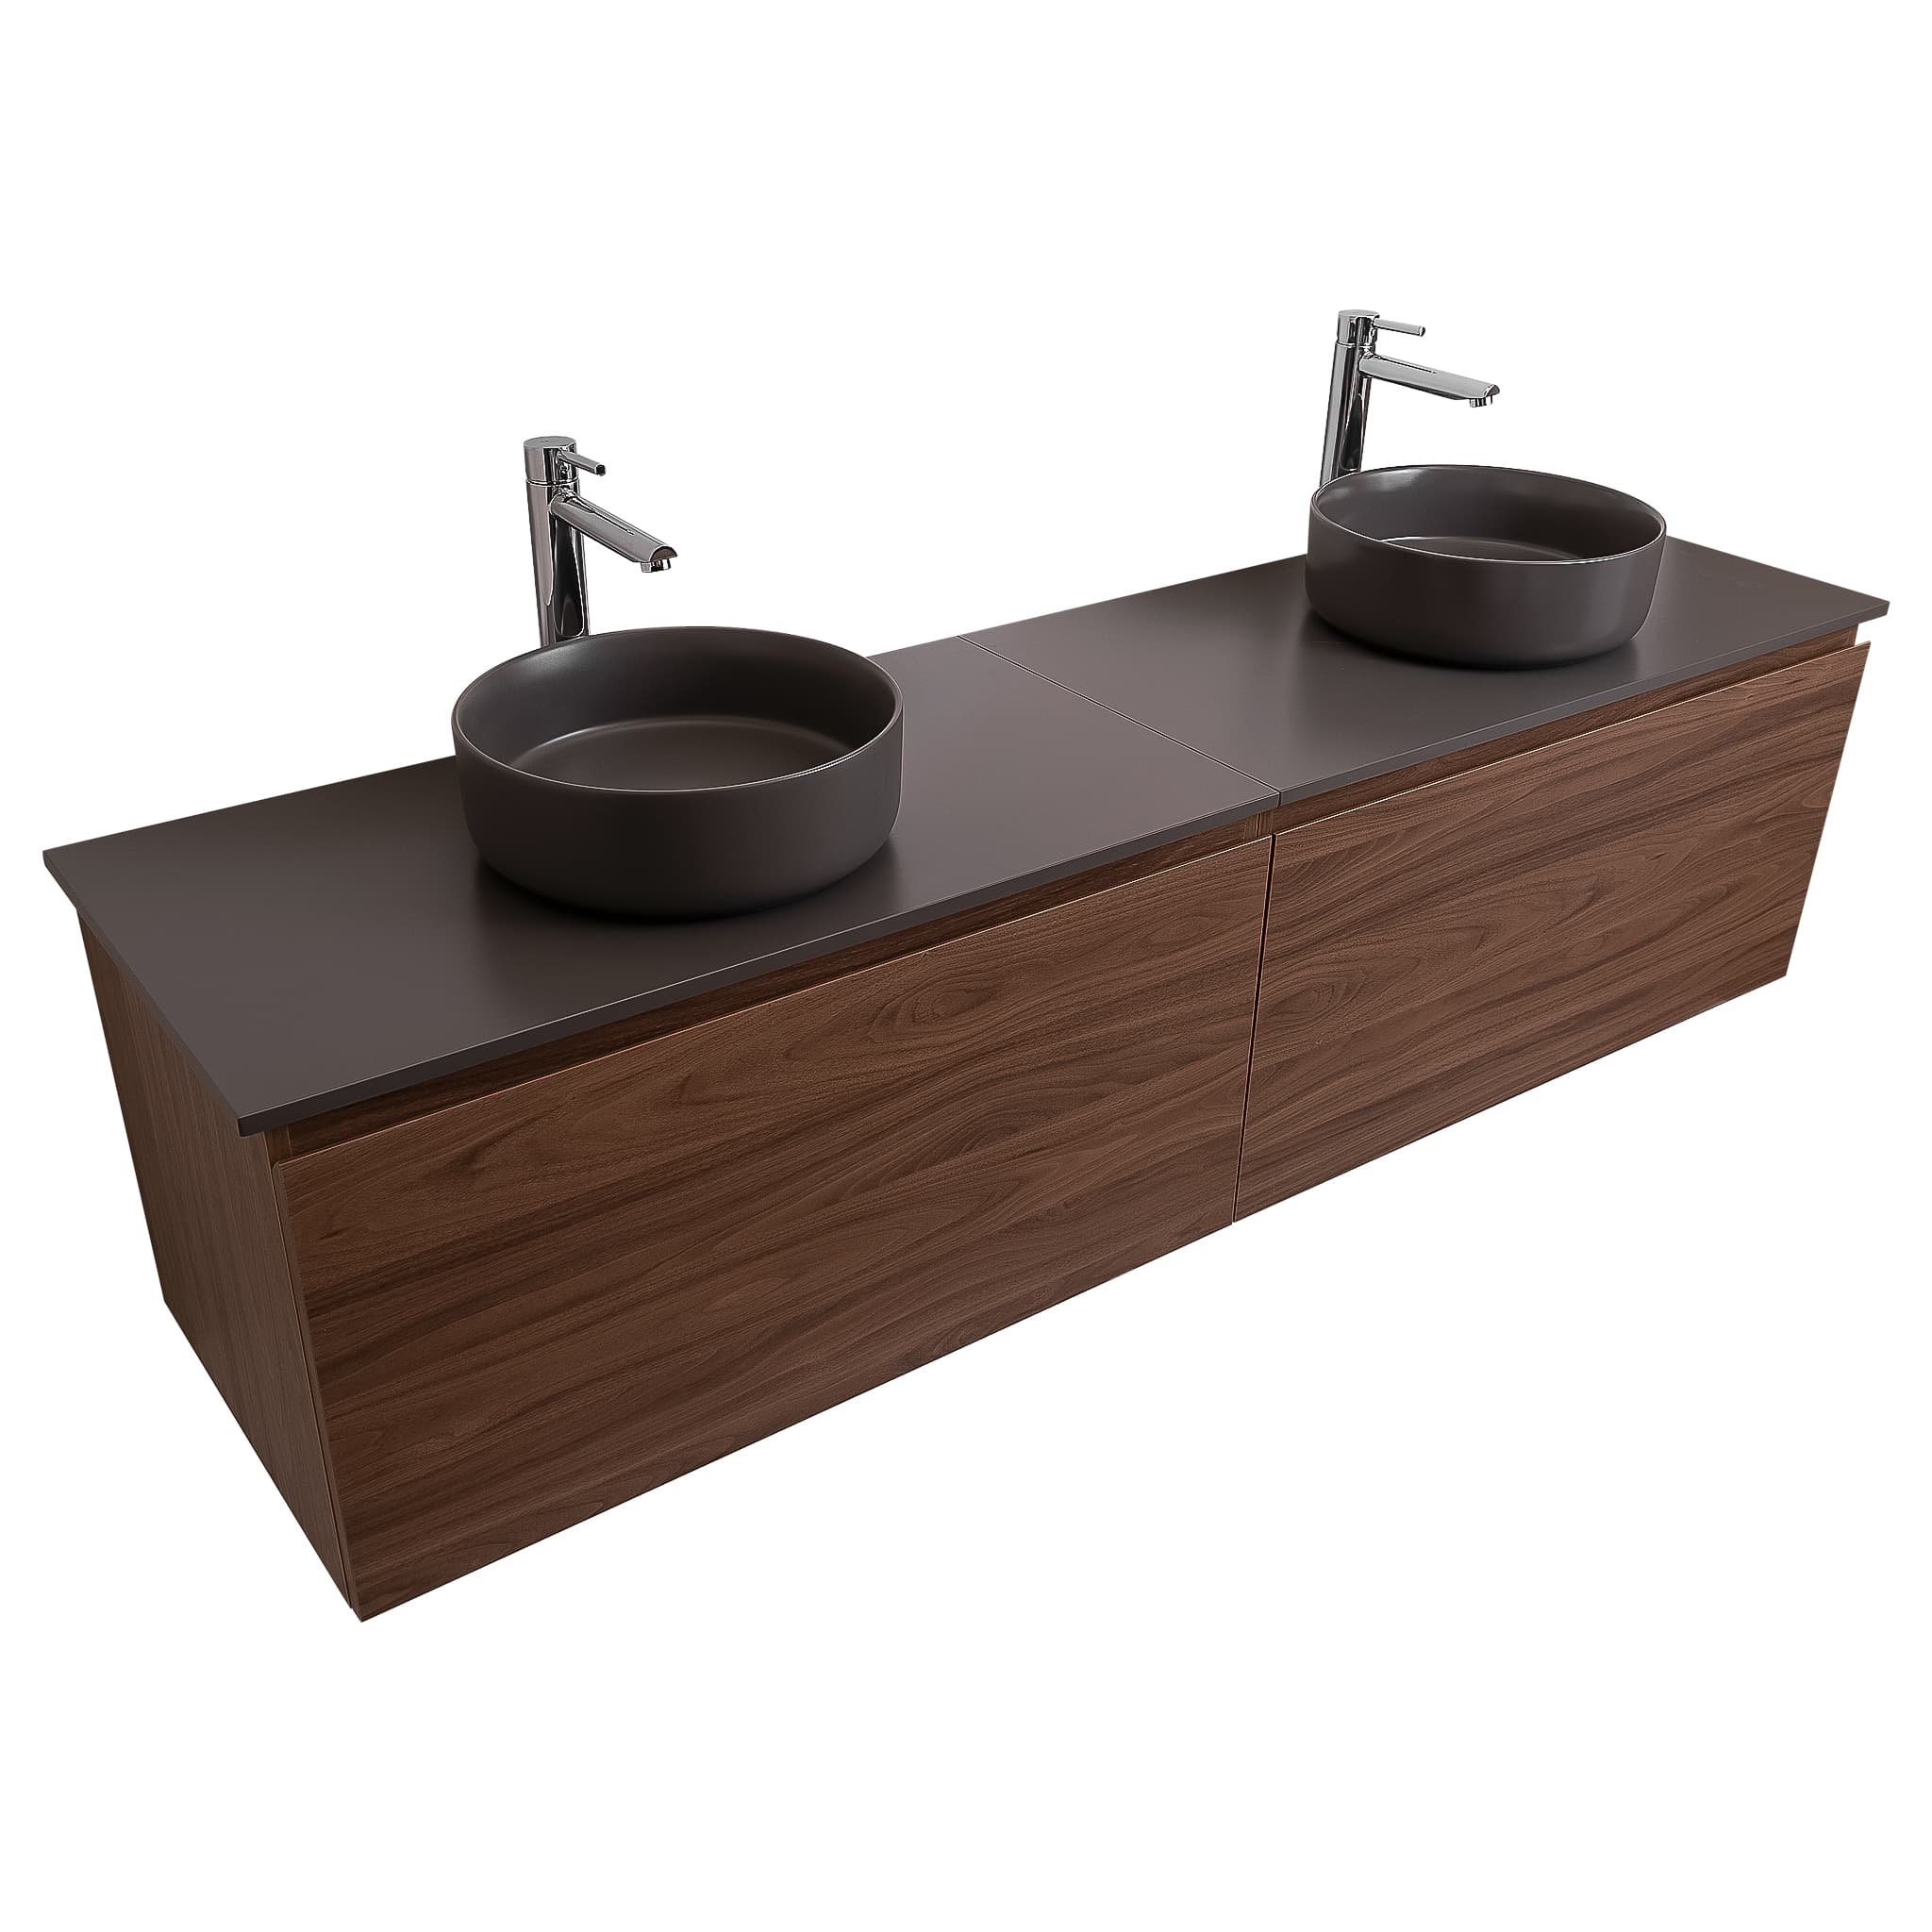 Venice 72 Walnut Wood Texture Cabinet, Ares Grey Ceniza Top And Two Ares Grey Ceniza Ceramic Basin, Wall Mounted Modern Vanity Set